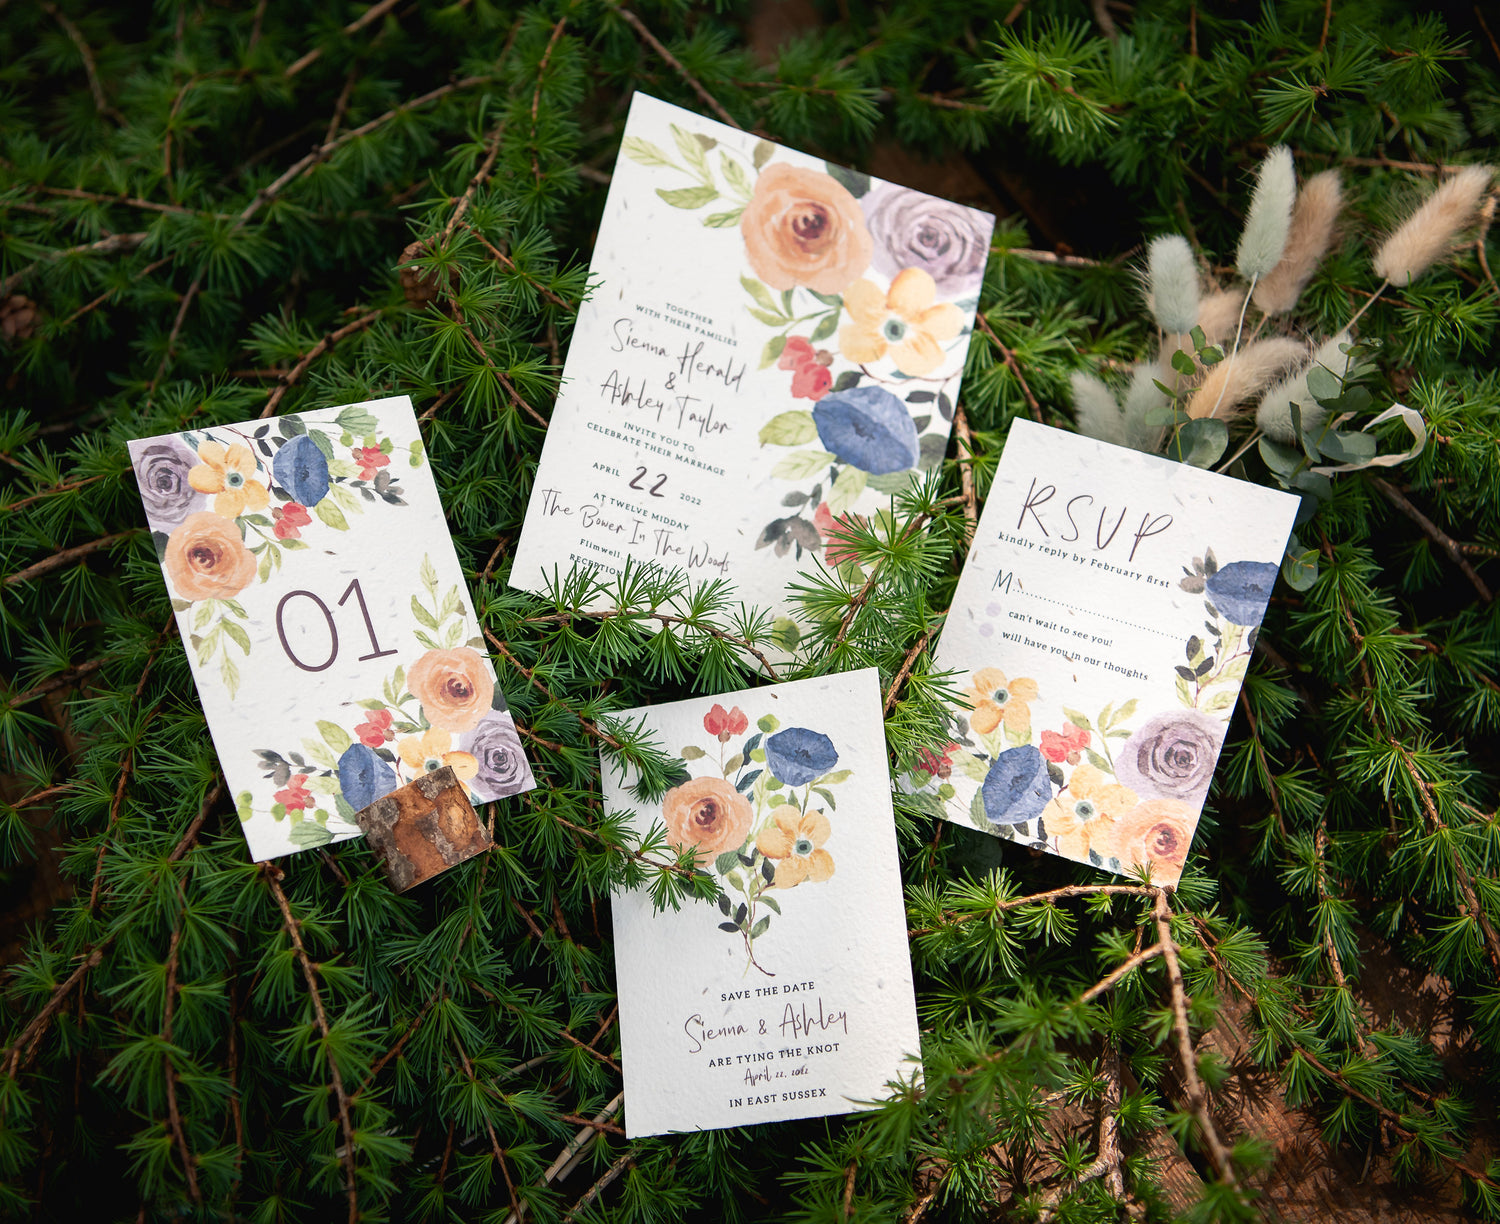 Seed paper wedding invite, rsvp, save the date and table numbers sat on a background of natural ferns.